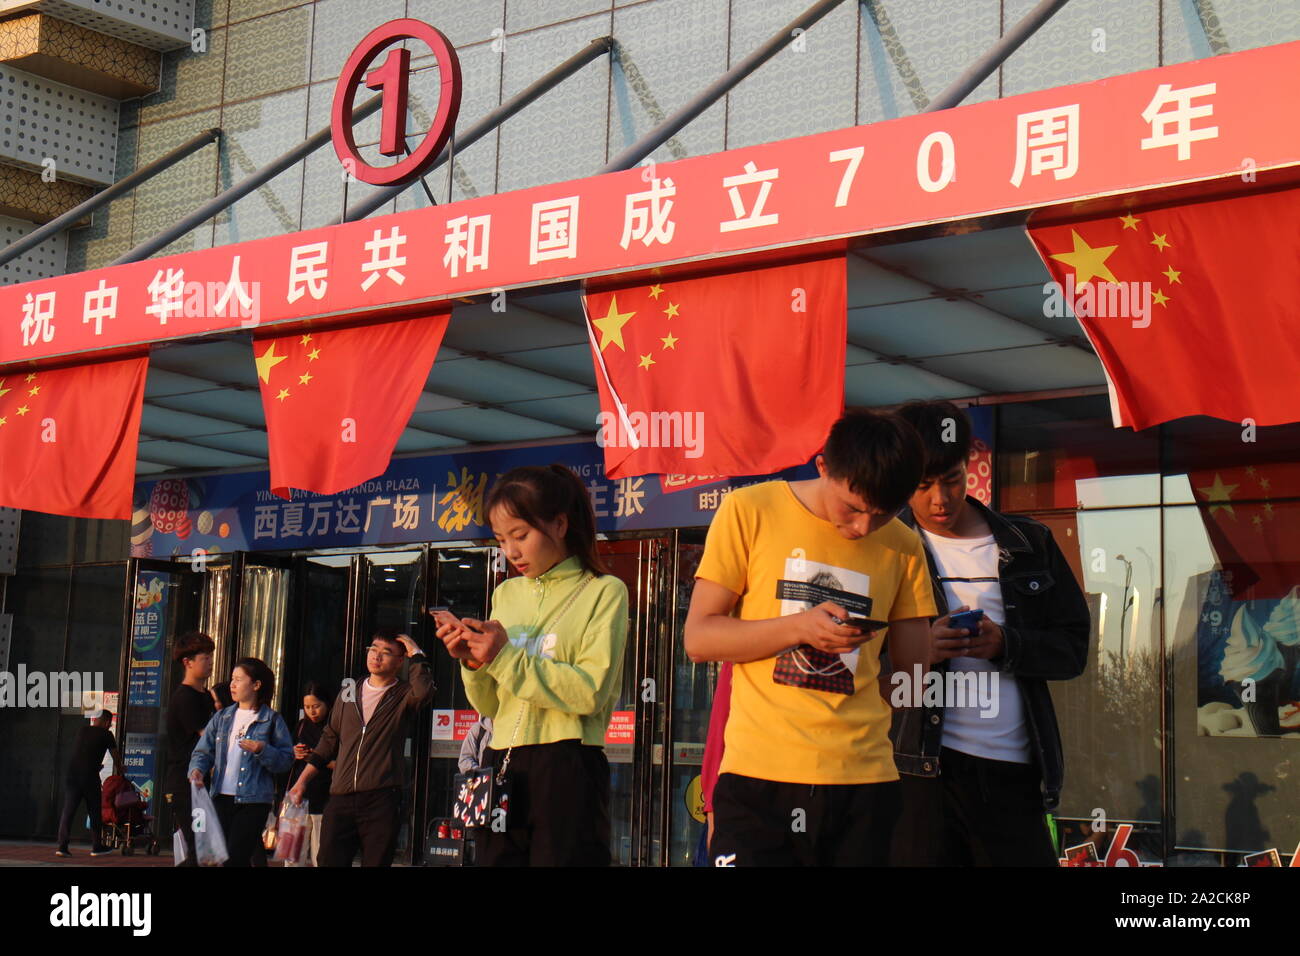 Yinchuan, Ningxia, China. 30th Sep, 2019. A group of teenagers use their  phones in front of Wanda Plaza main entrance decorated with national flags  and the slogan '' Warmest celebrations of the